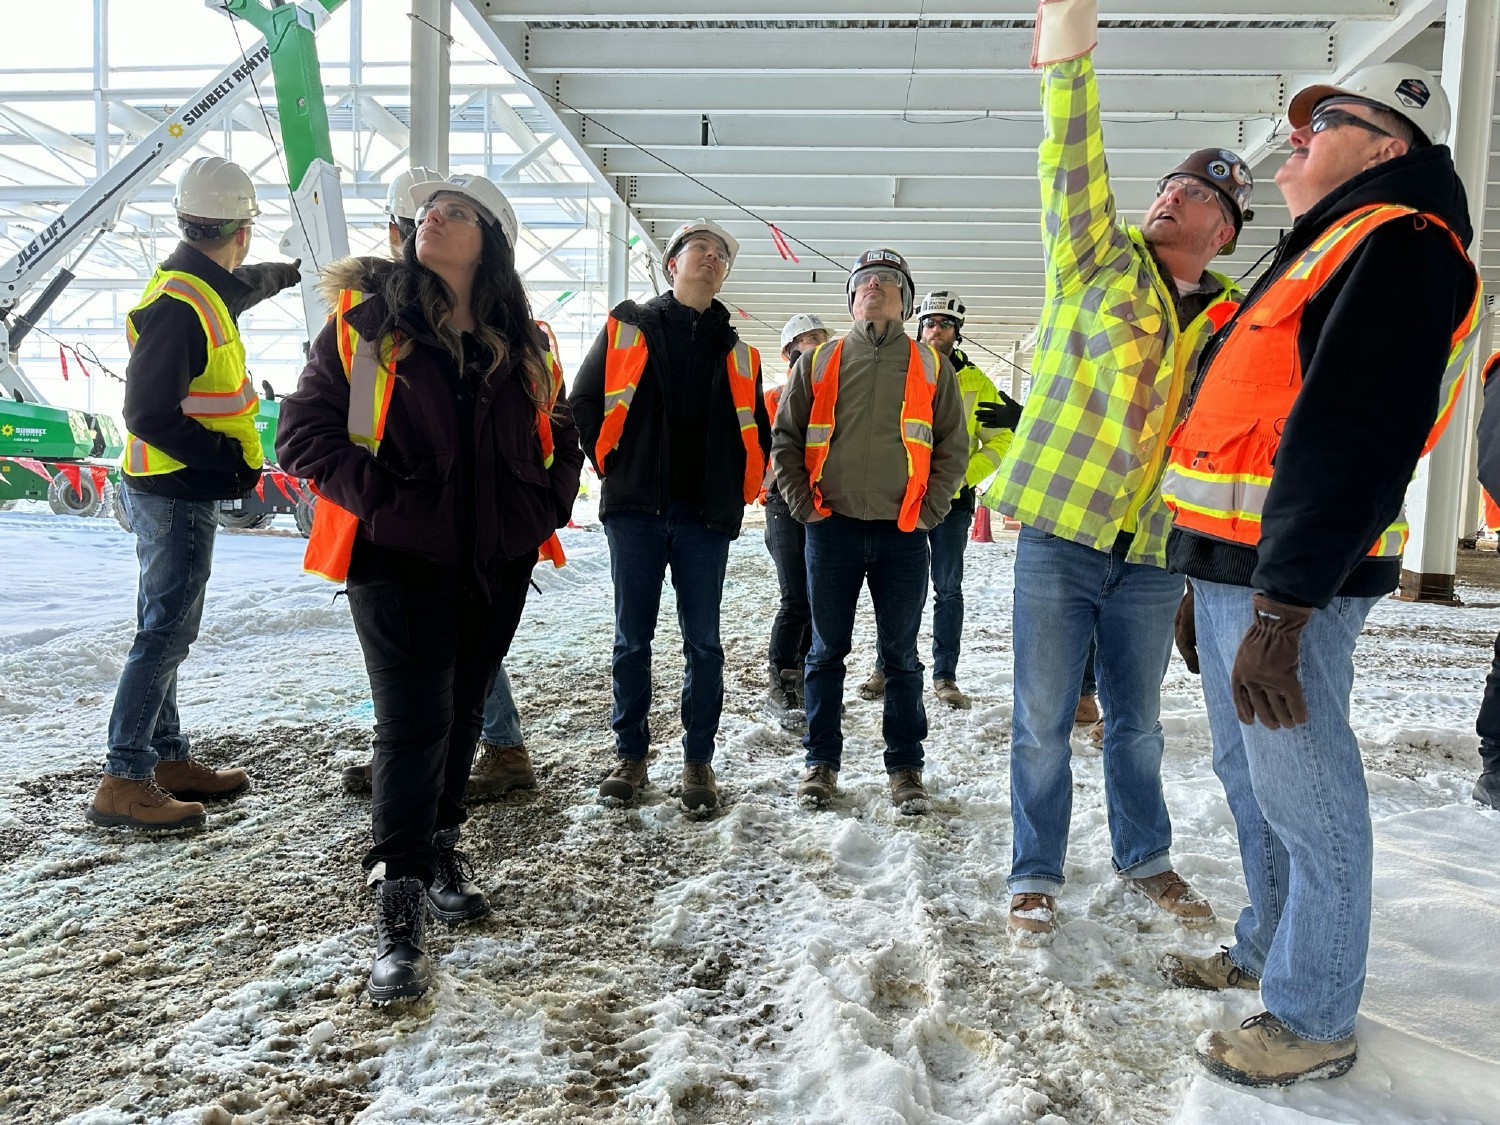 Ruby engineers visit a General Motors project construction site in Lansing, Michigan to see their work come to life.